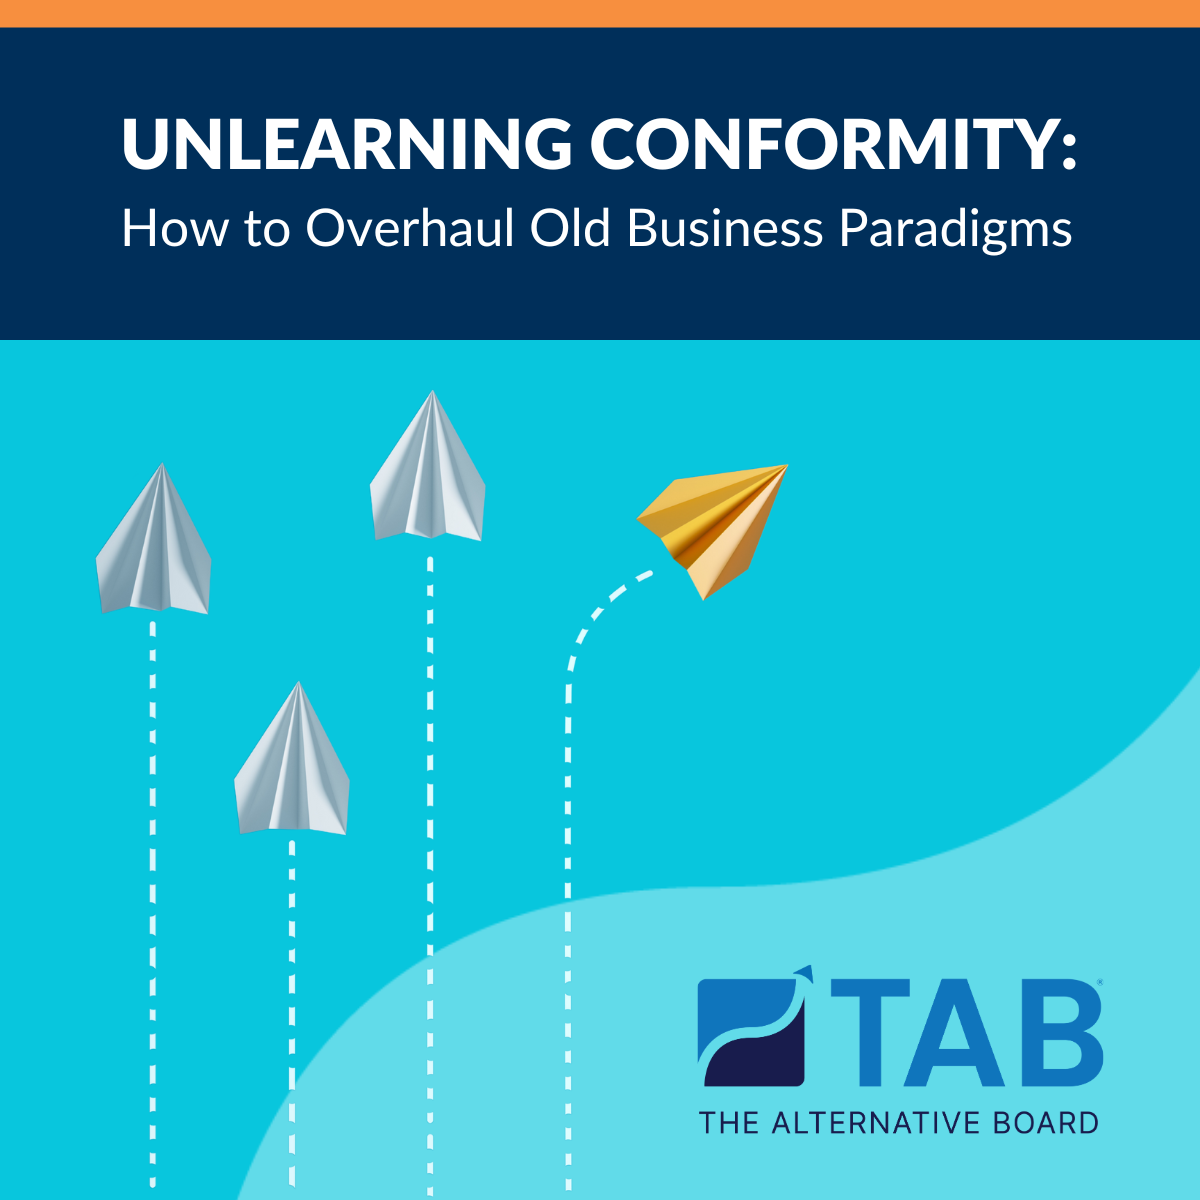 Unlearning Conformity: How to Overhaul Old Business Paradigms